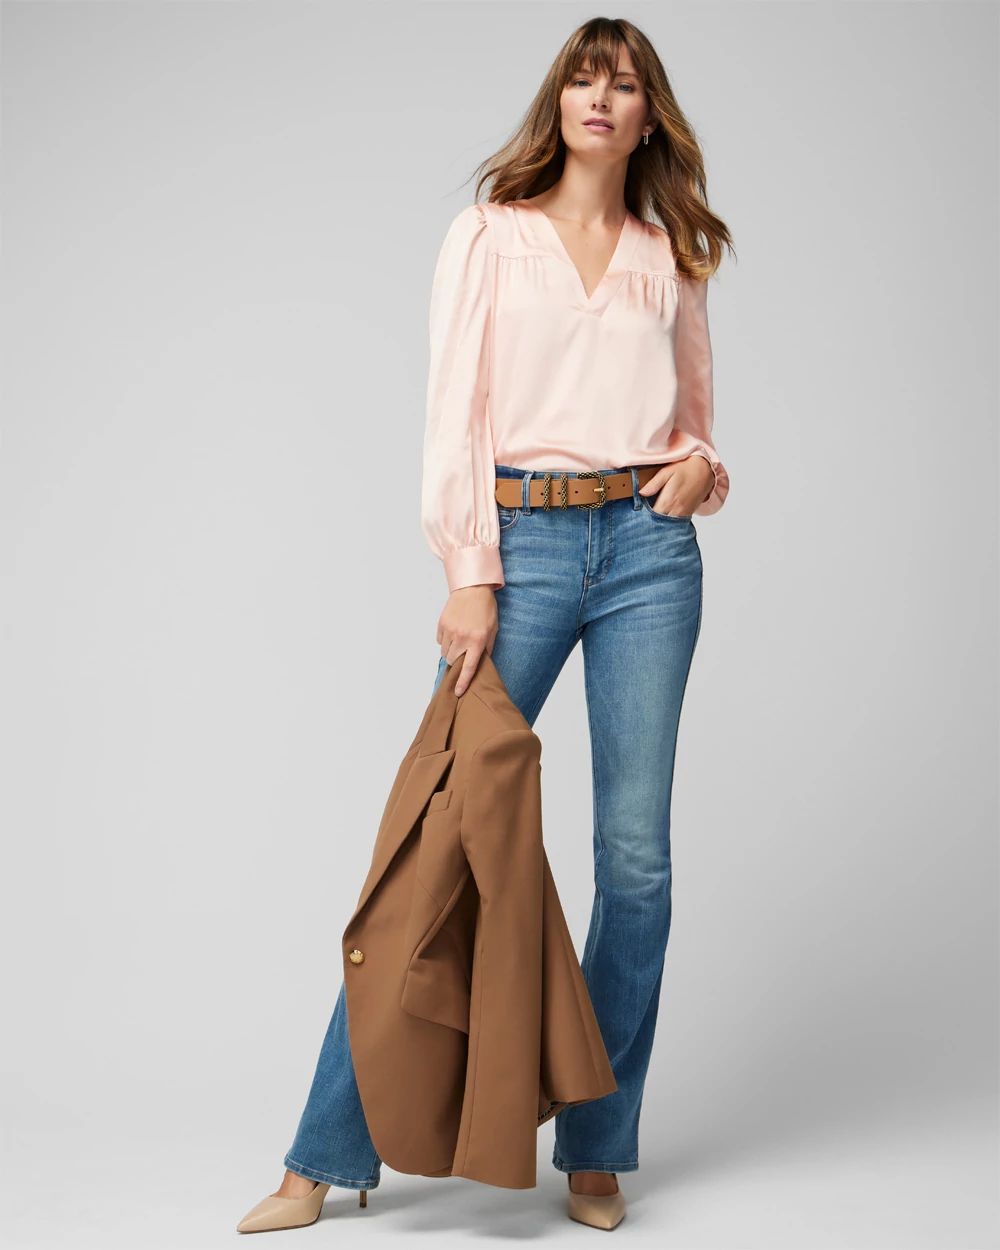 Long Sleeve Topstitch Satin Blouse click to view larger image.